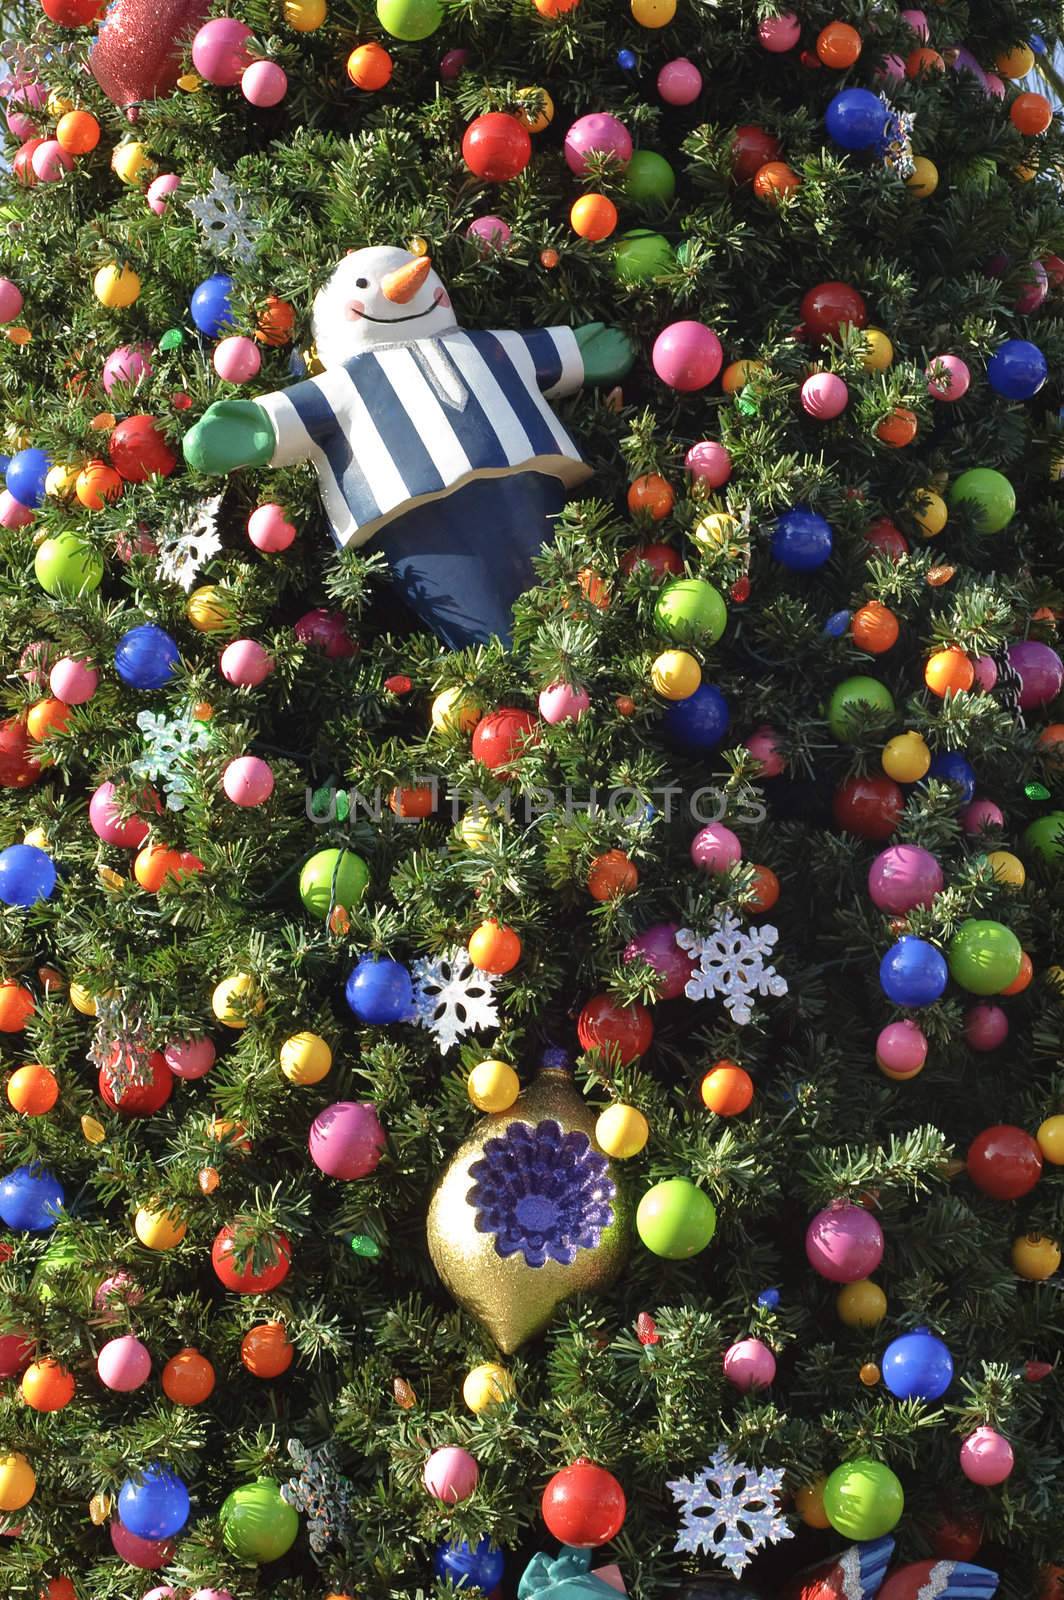 Close-up of Christmas tree decorated with ornaments outside